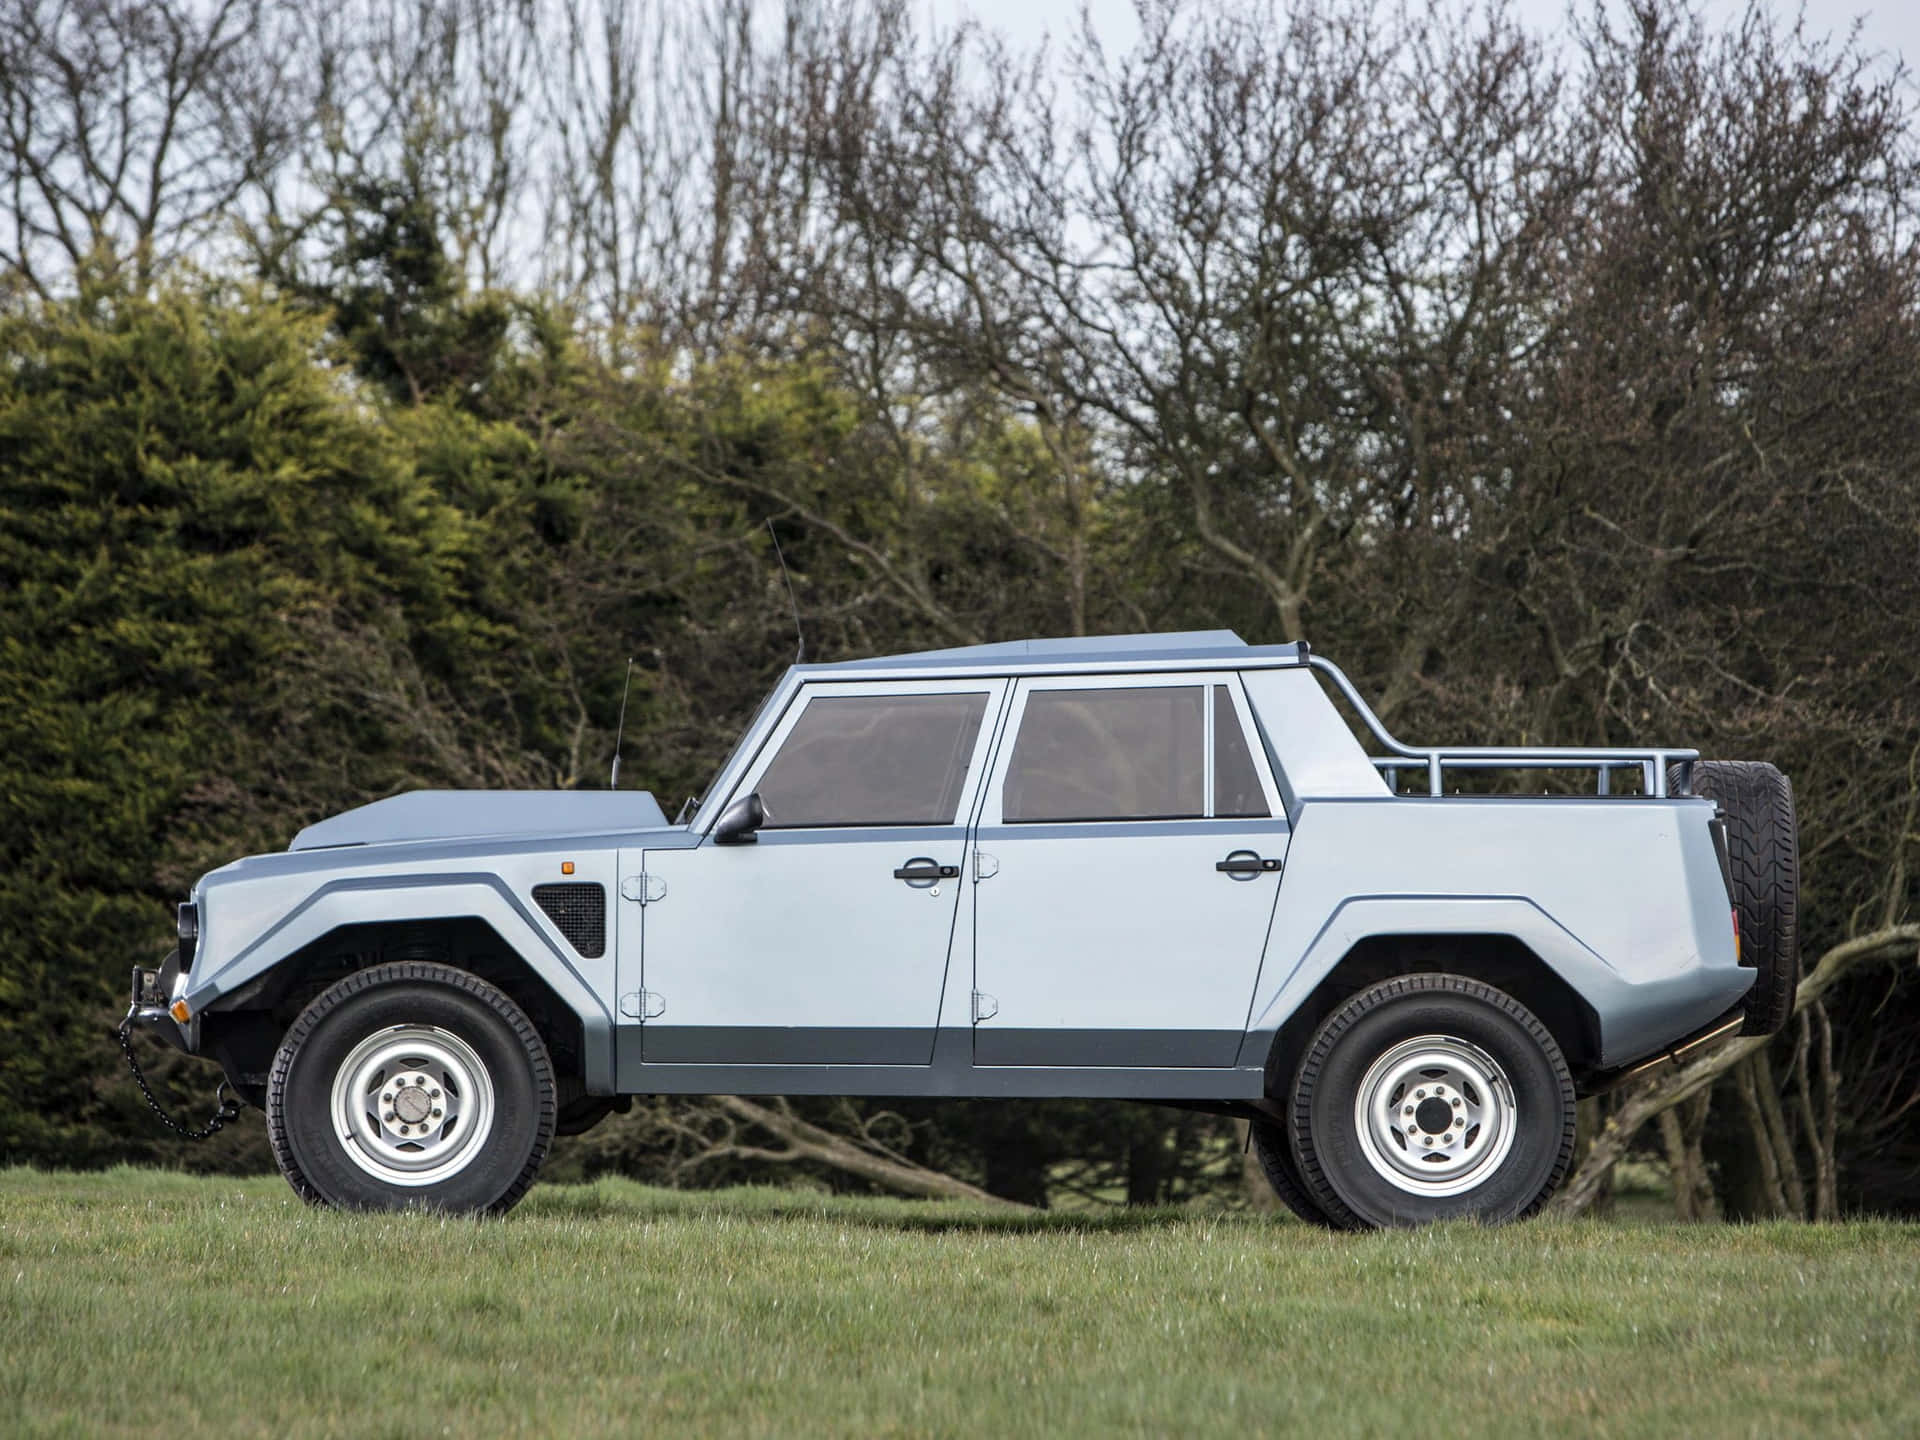 A Lamborghini LM002, the iconic luxury off-road vehicle, in high resolution wallpaper. Wallpaper